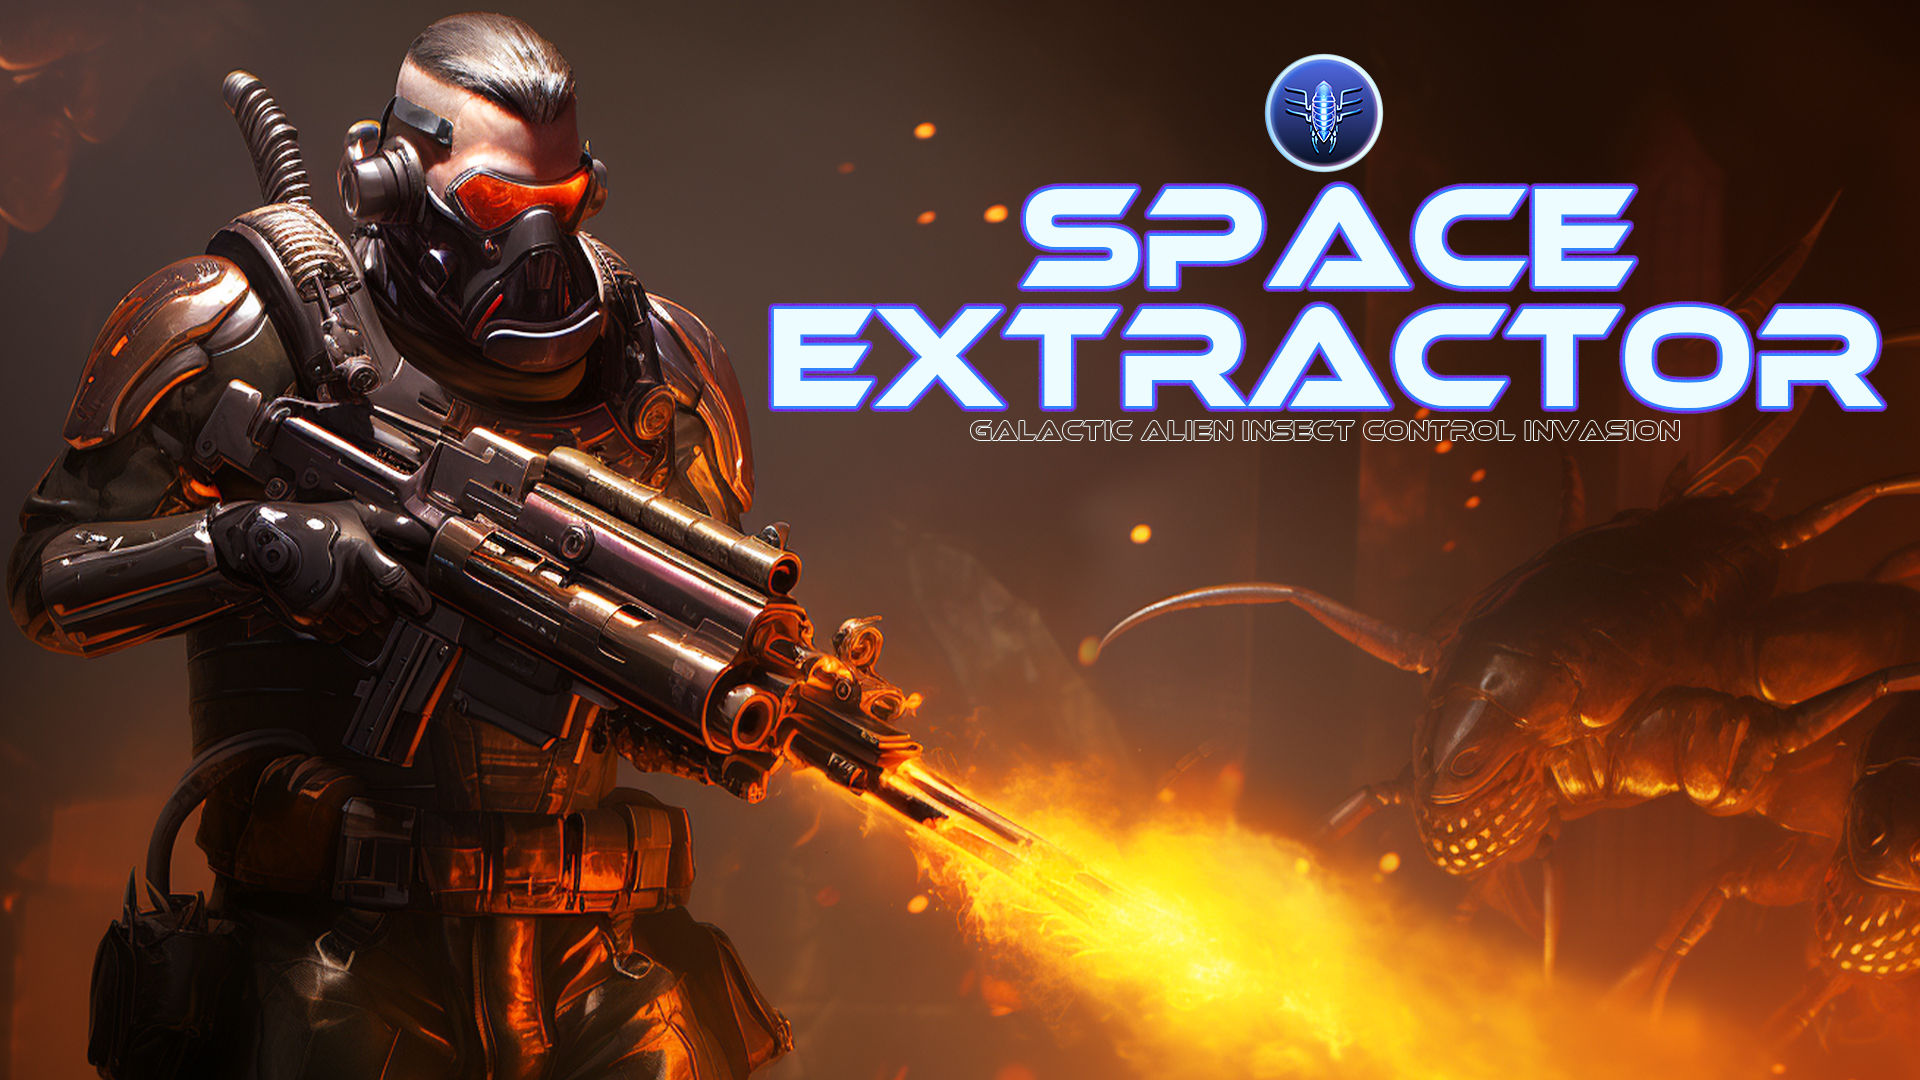 Space Extractor: Galactic Alien Insect Control Invasion